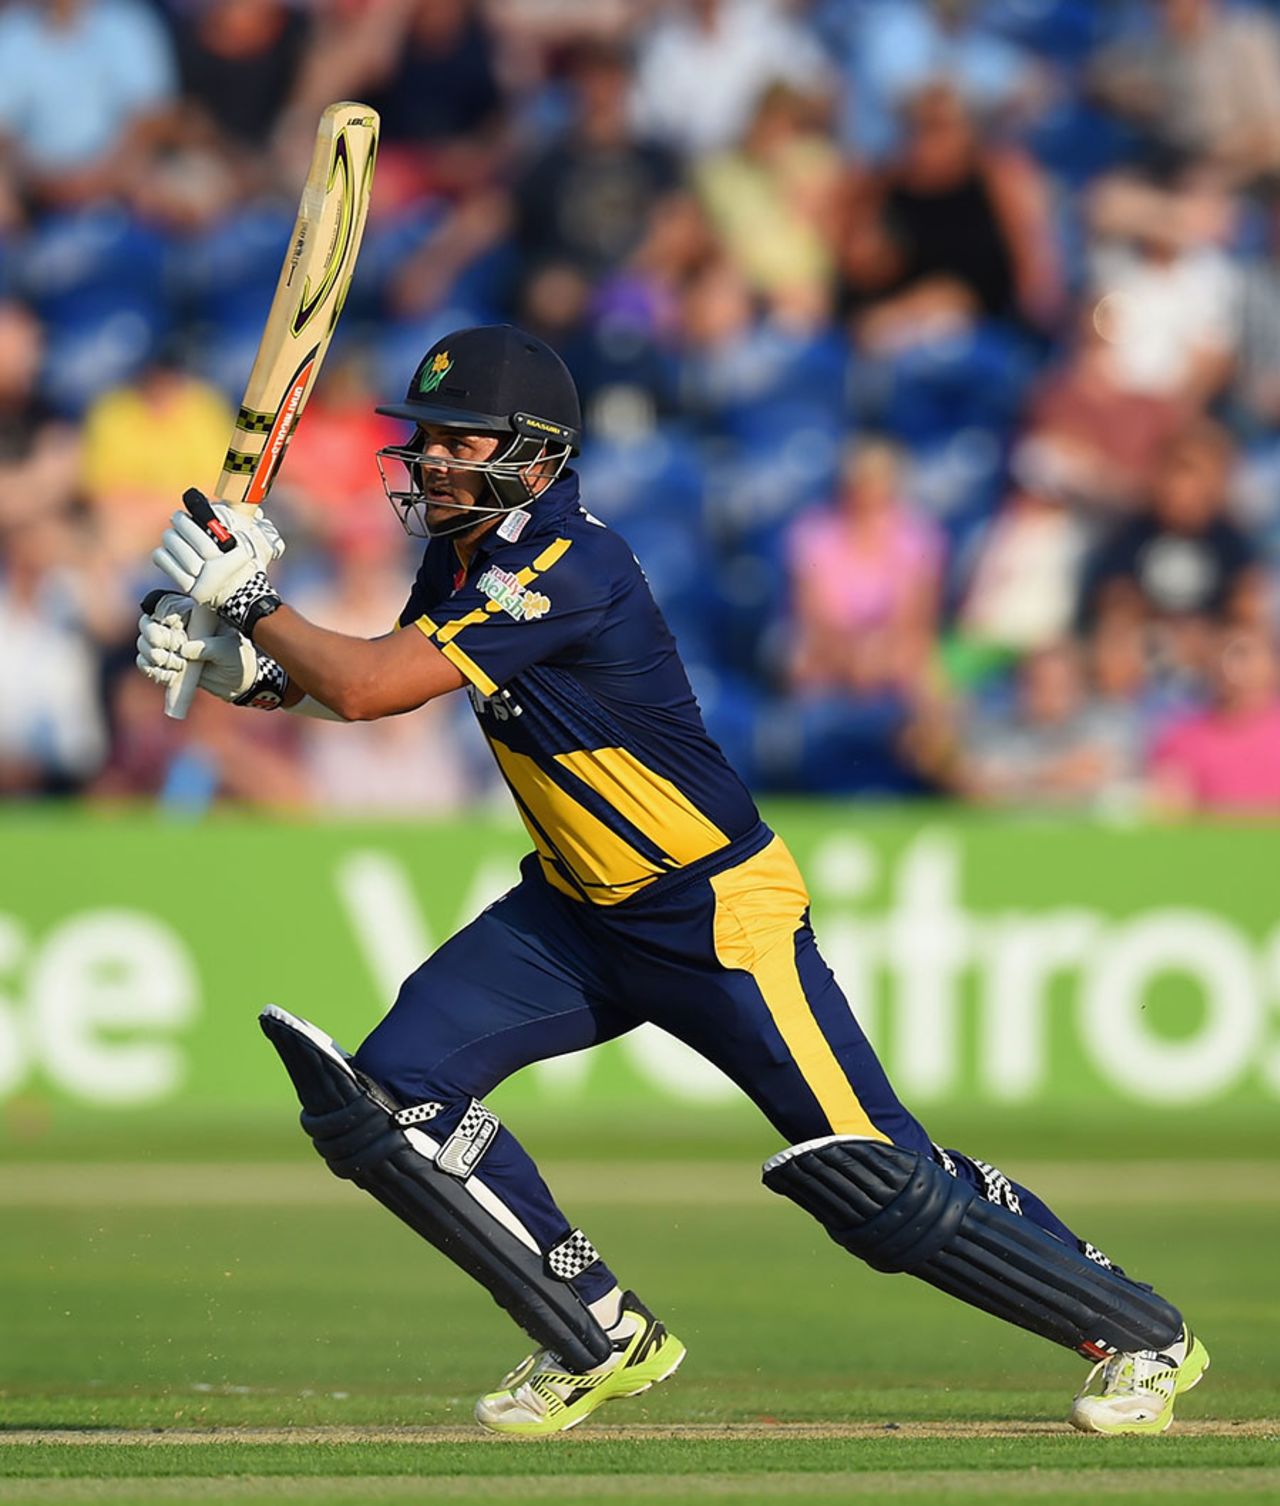 Jacques Rudolph saw Glamorgan home easily, Glamorgan v Gloucestershire, NatWest T20, Cardiff, July 25, 2014